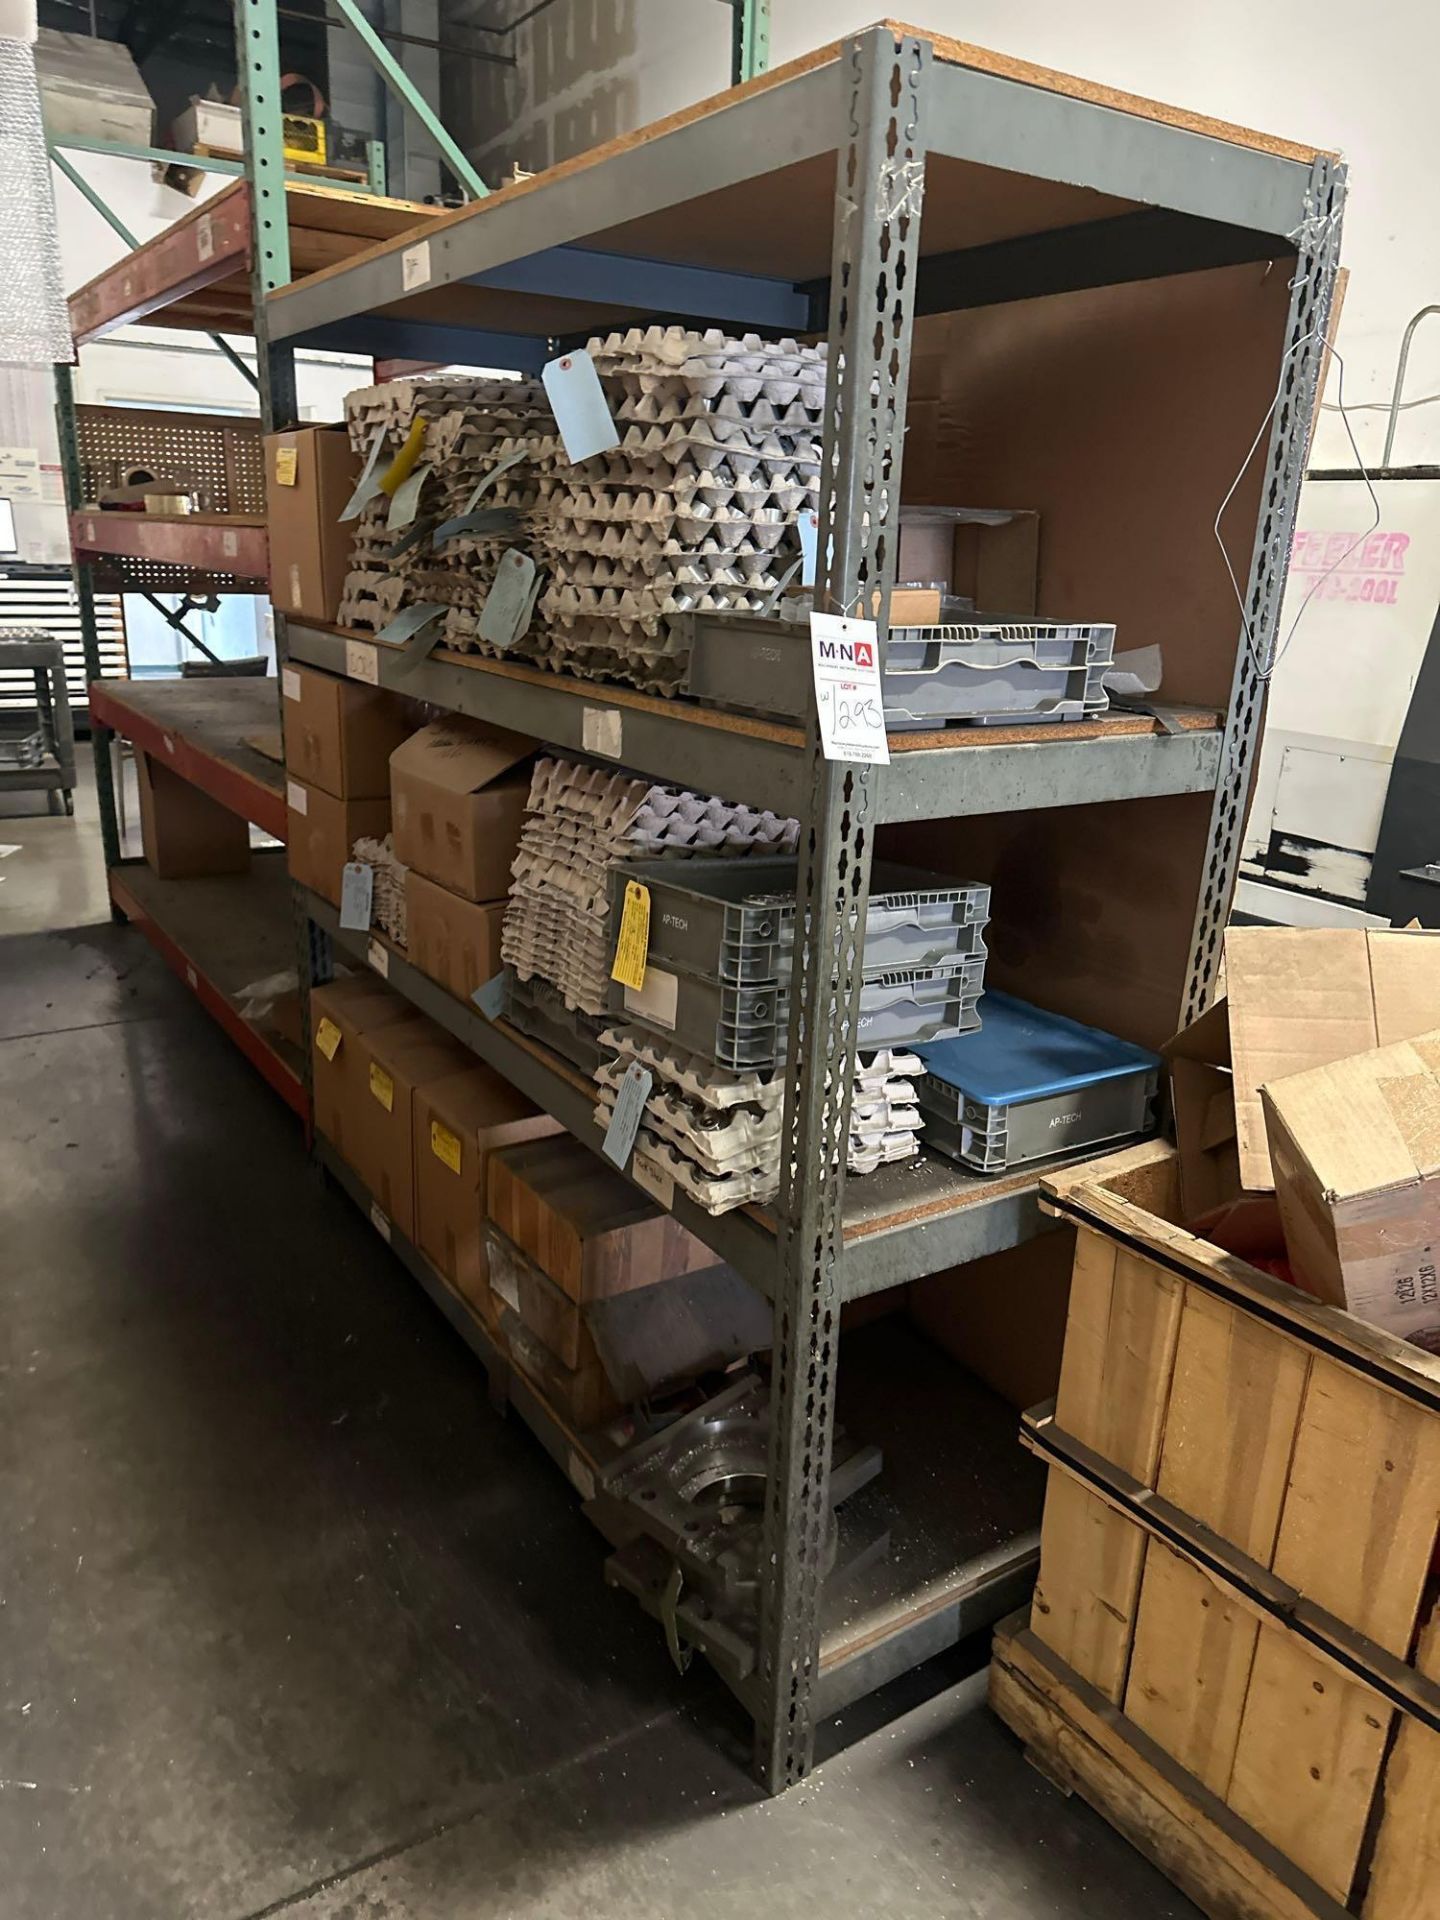 (2) Sections of 71”L x 23”W x 71”H Shelving